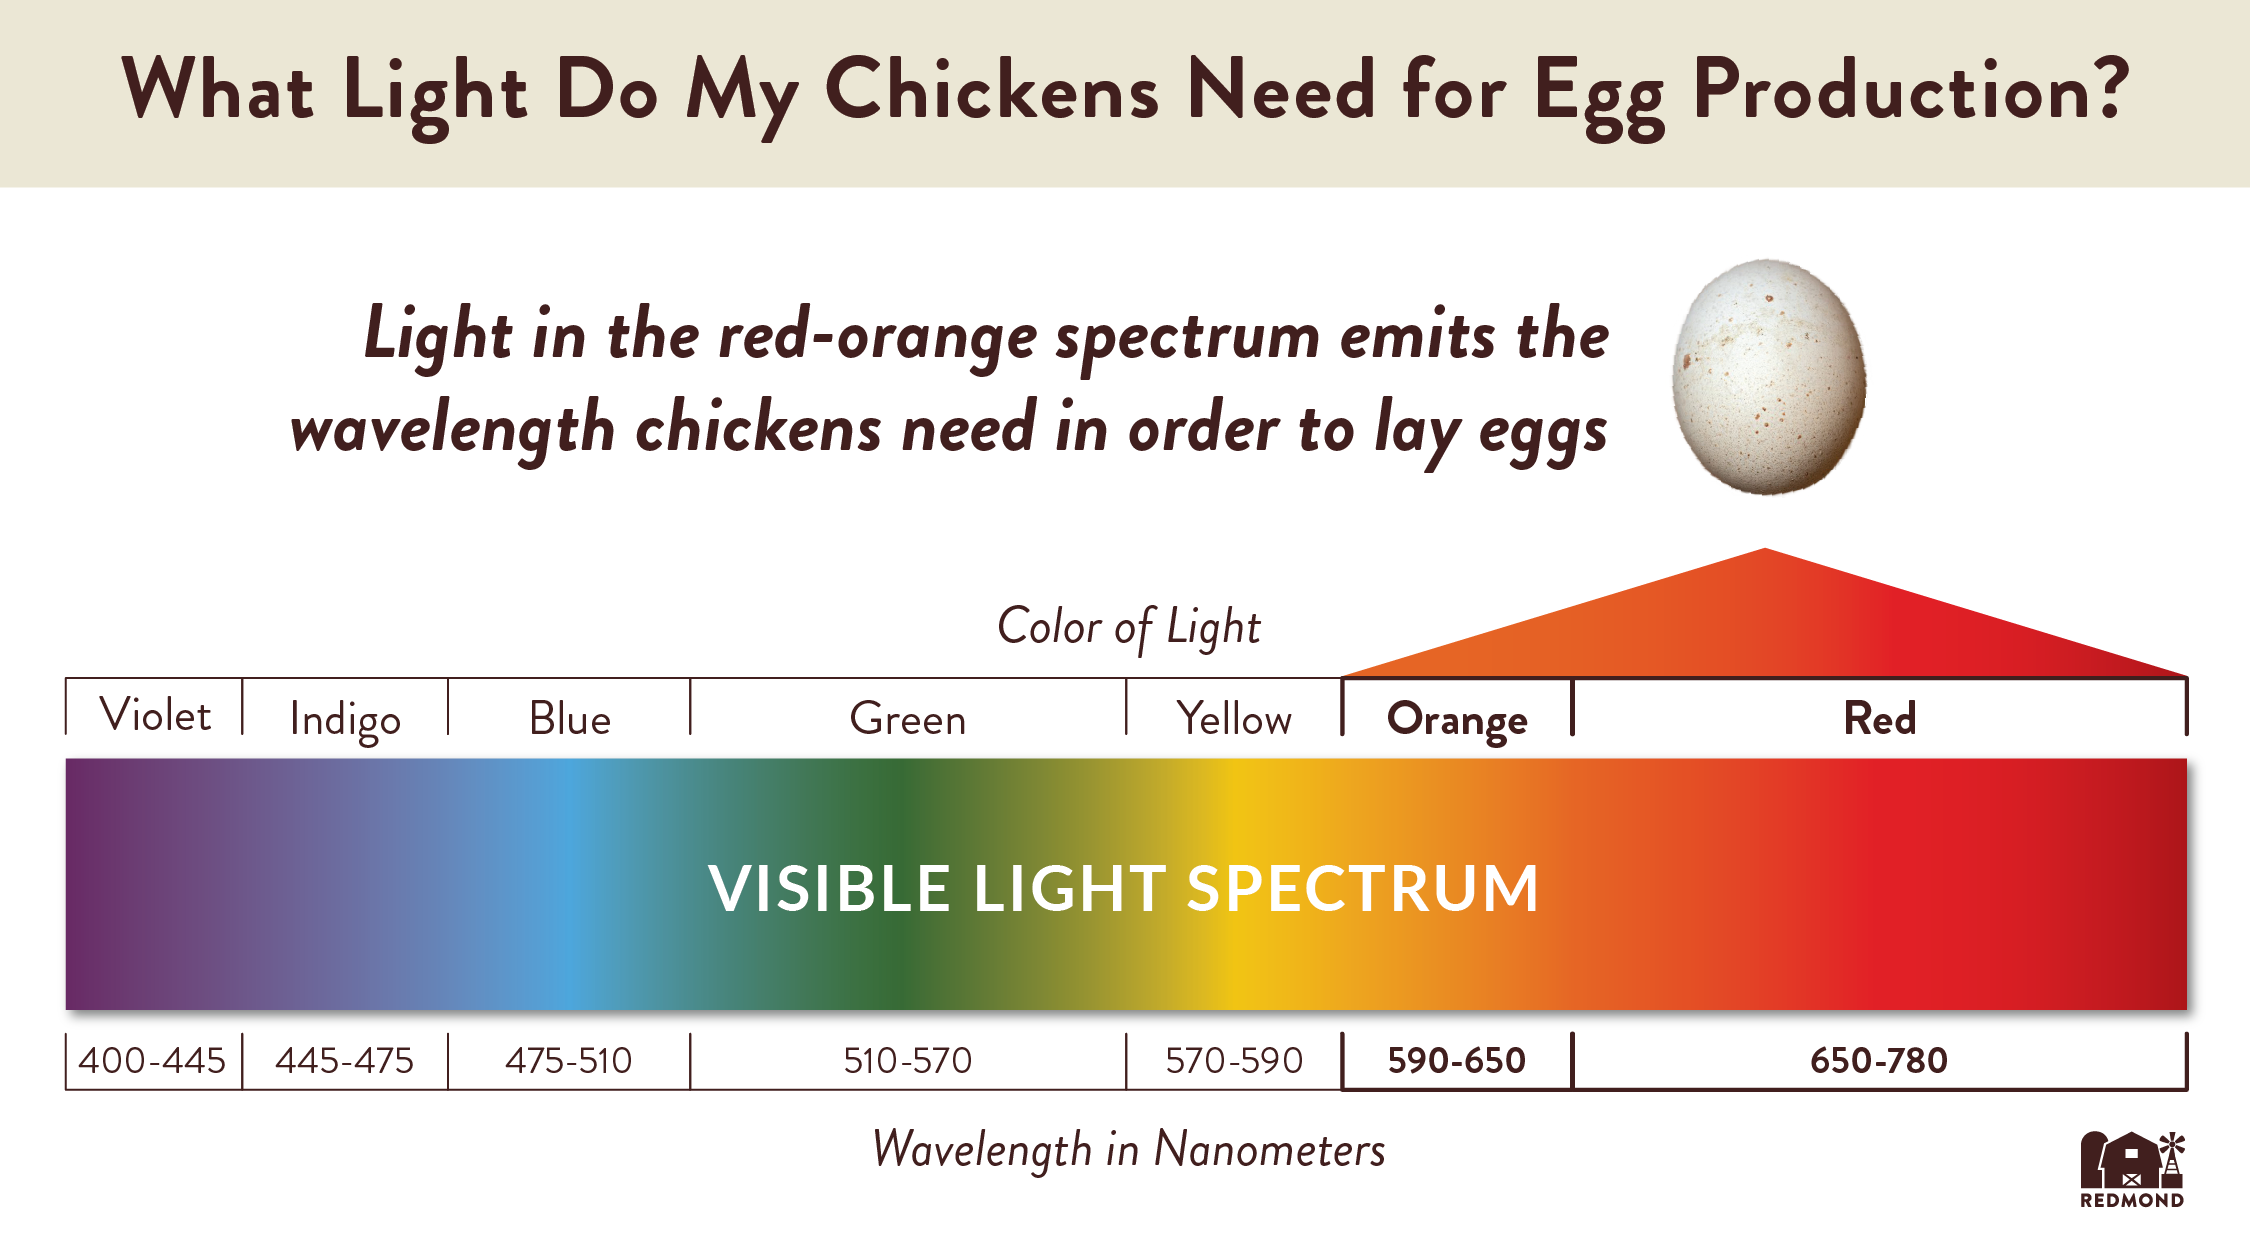 What light do my chickens need for egg production